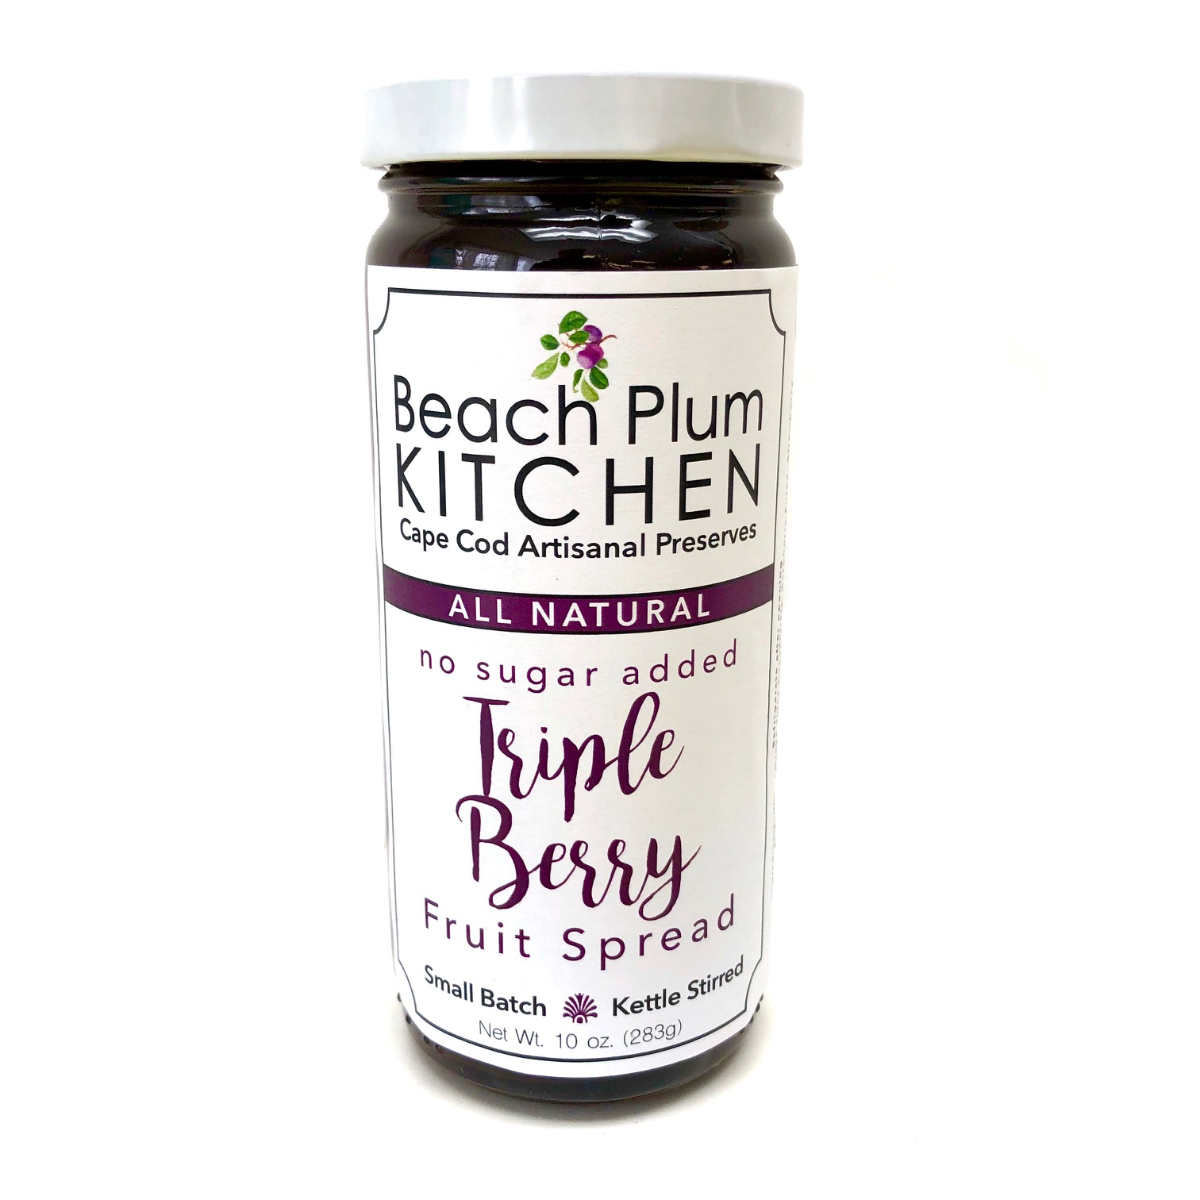 Cape Cod's Beach Plum Kitchen Triple Berry Jam is made with real strawberries, raspberries and blueberries bursting with antioxidants in small batches and kettle stirred in the traditional artisanal method.